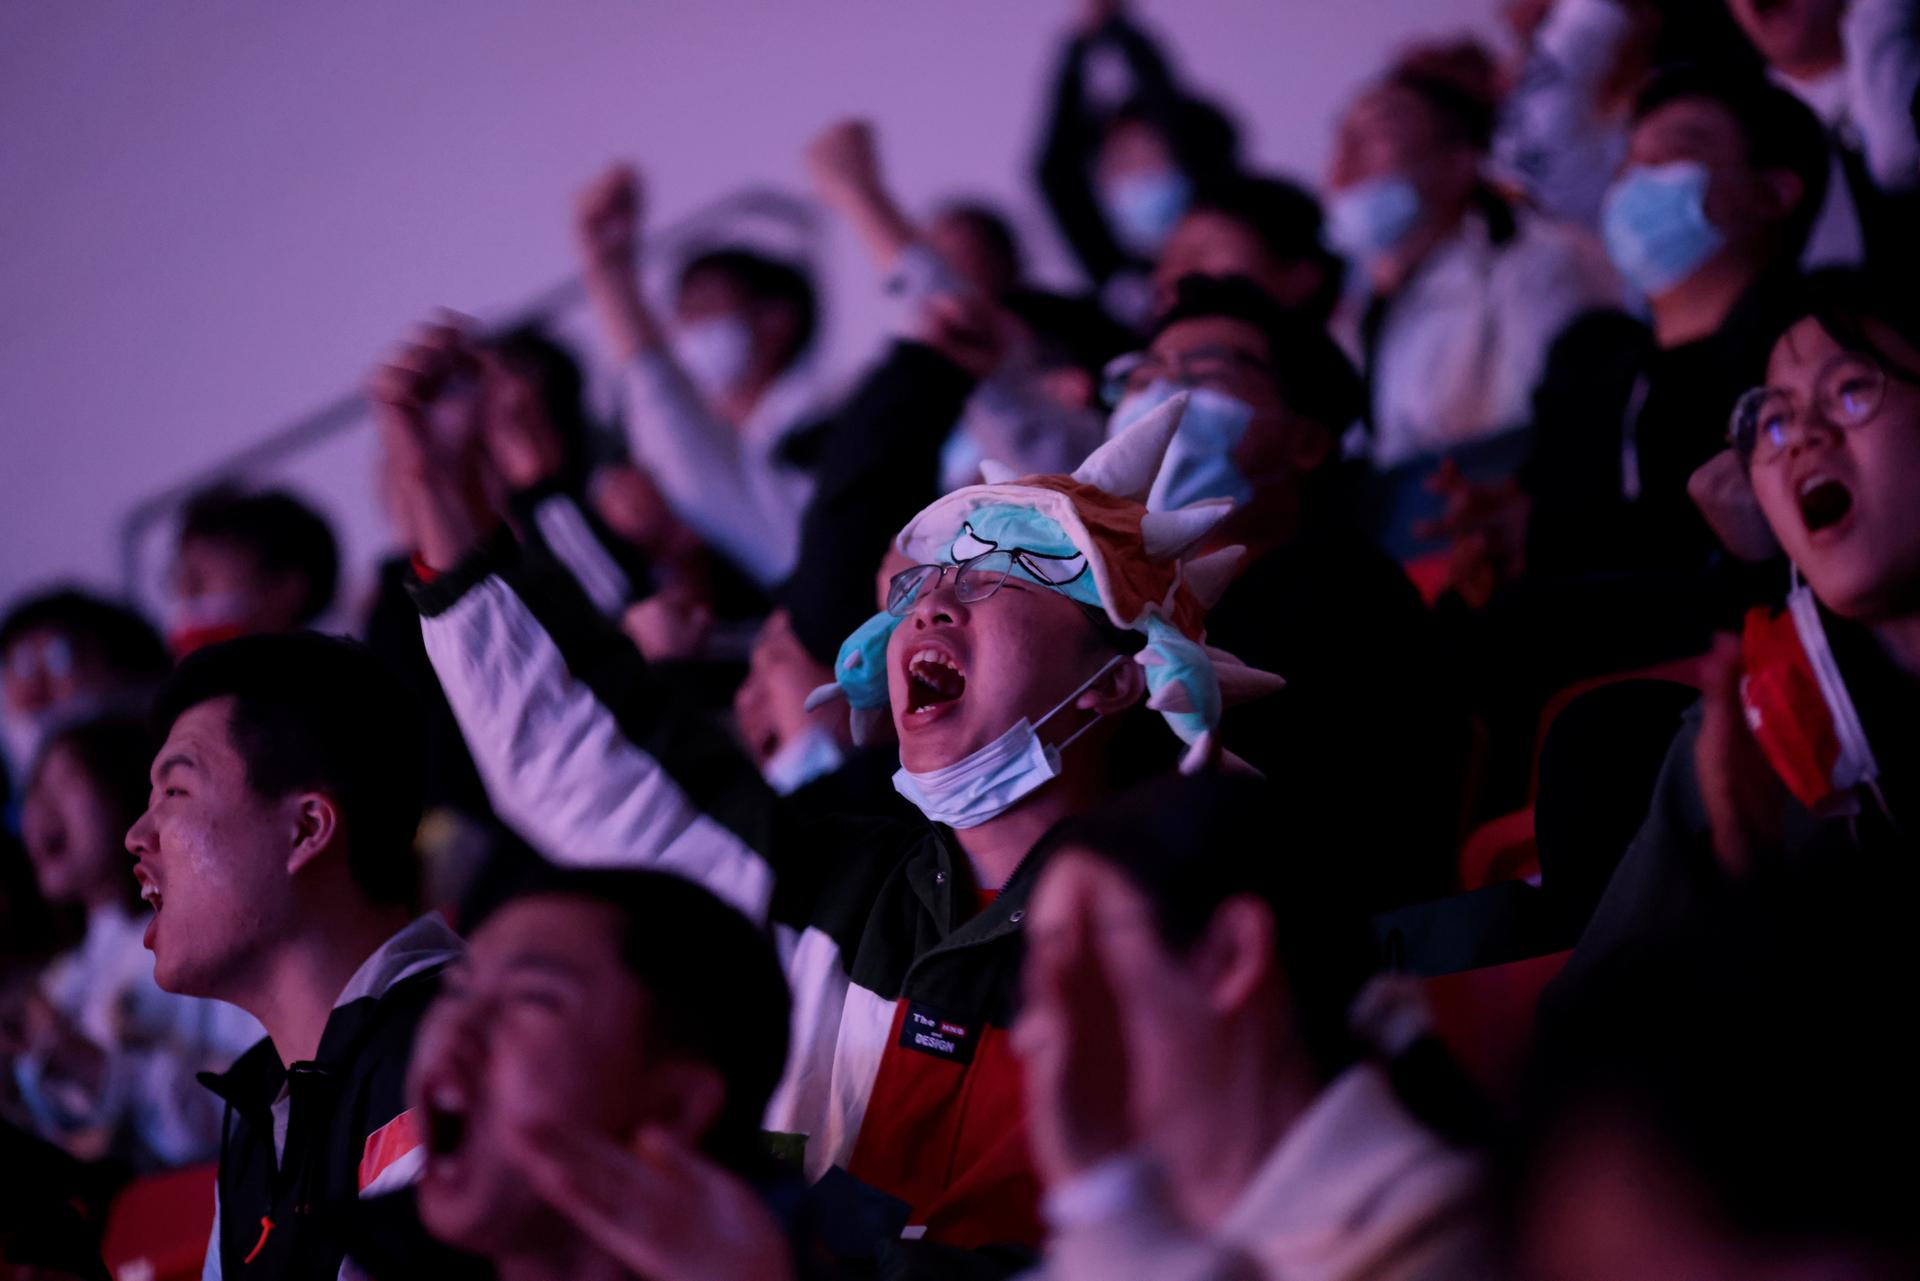 Fans react at the League of Legends (LOL) World Championship Finals, in Shanghai.